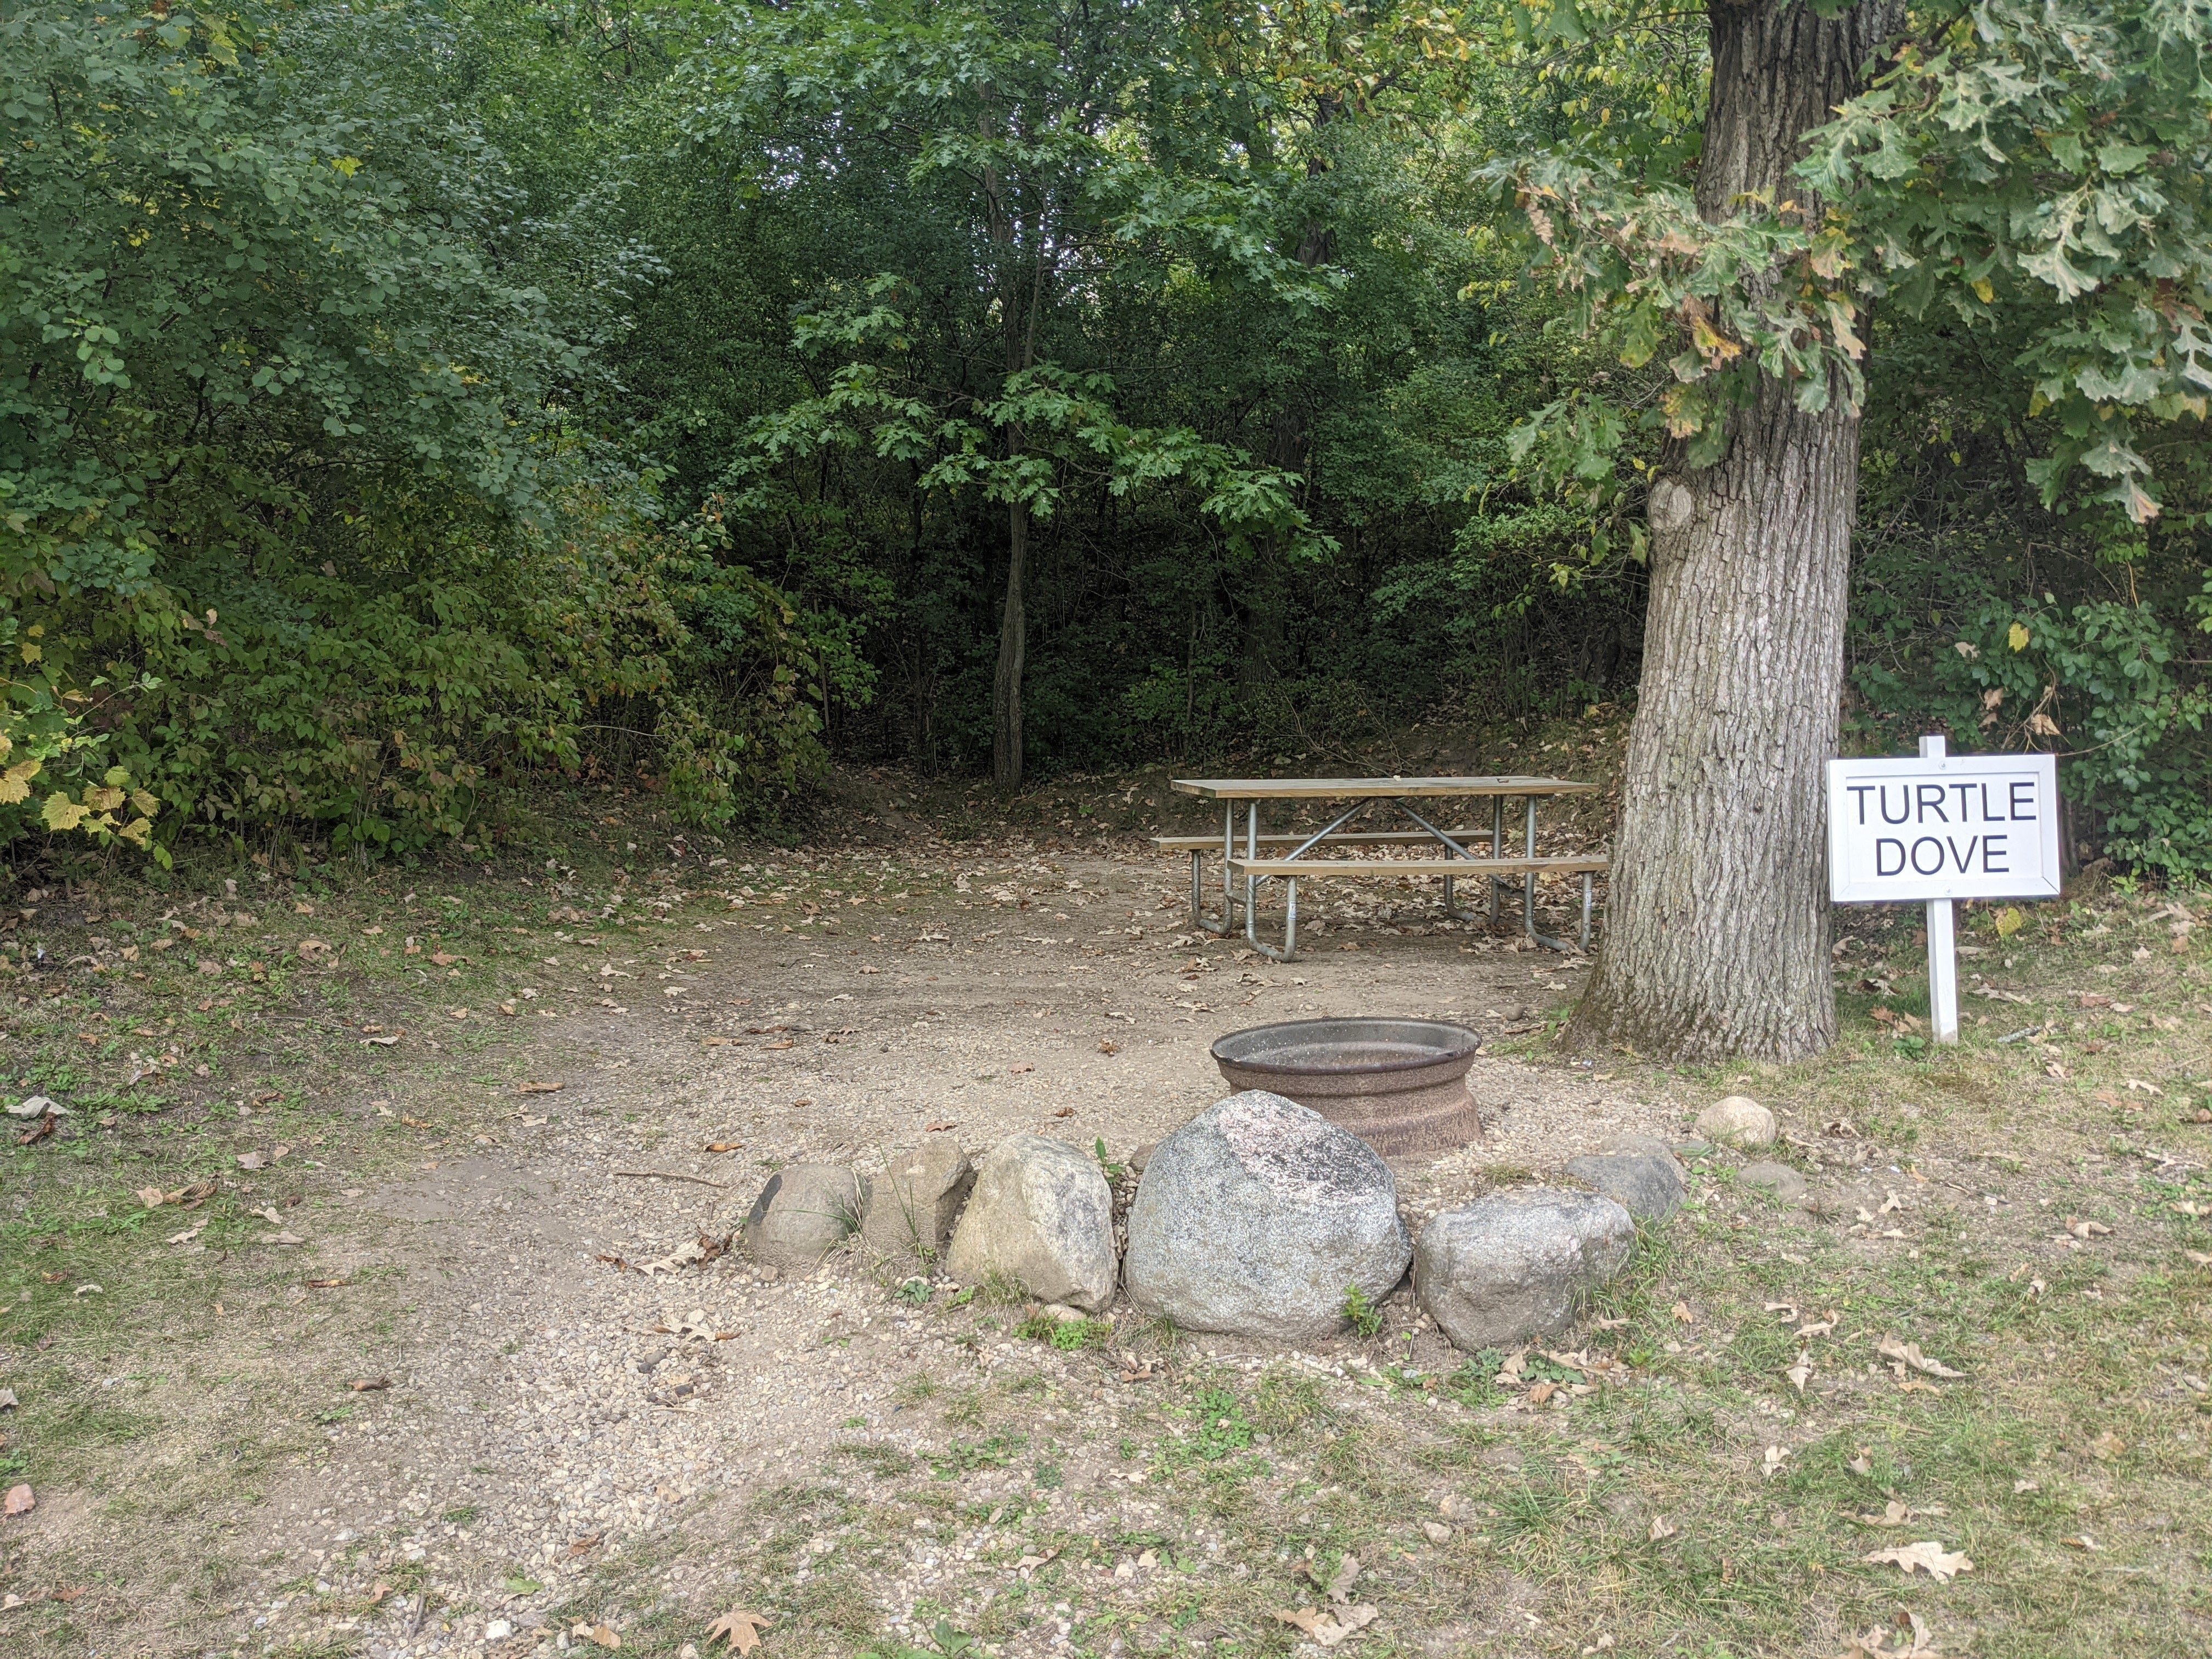 Camper submitted image from Snug Harbor Inn Campground on Turtle Lake - 1